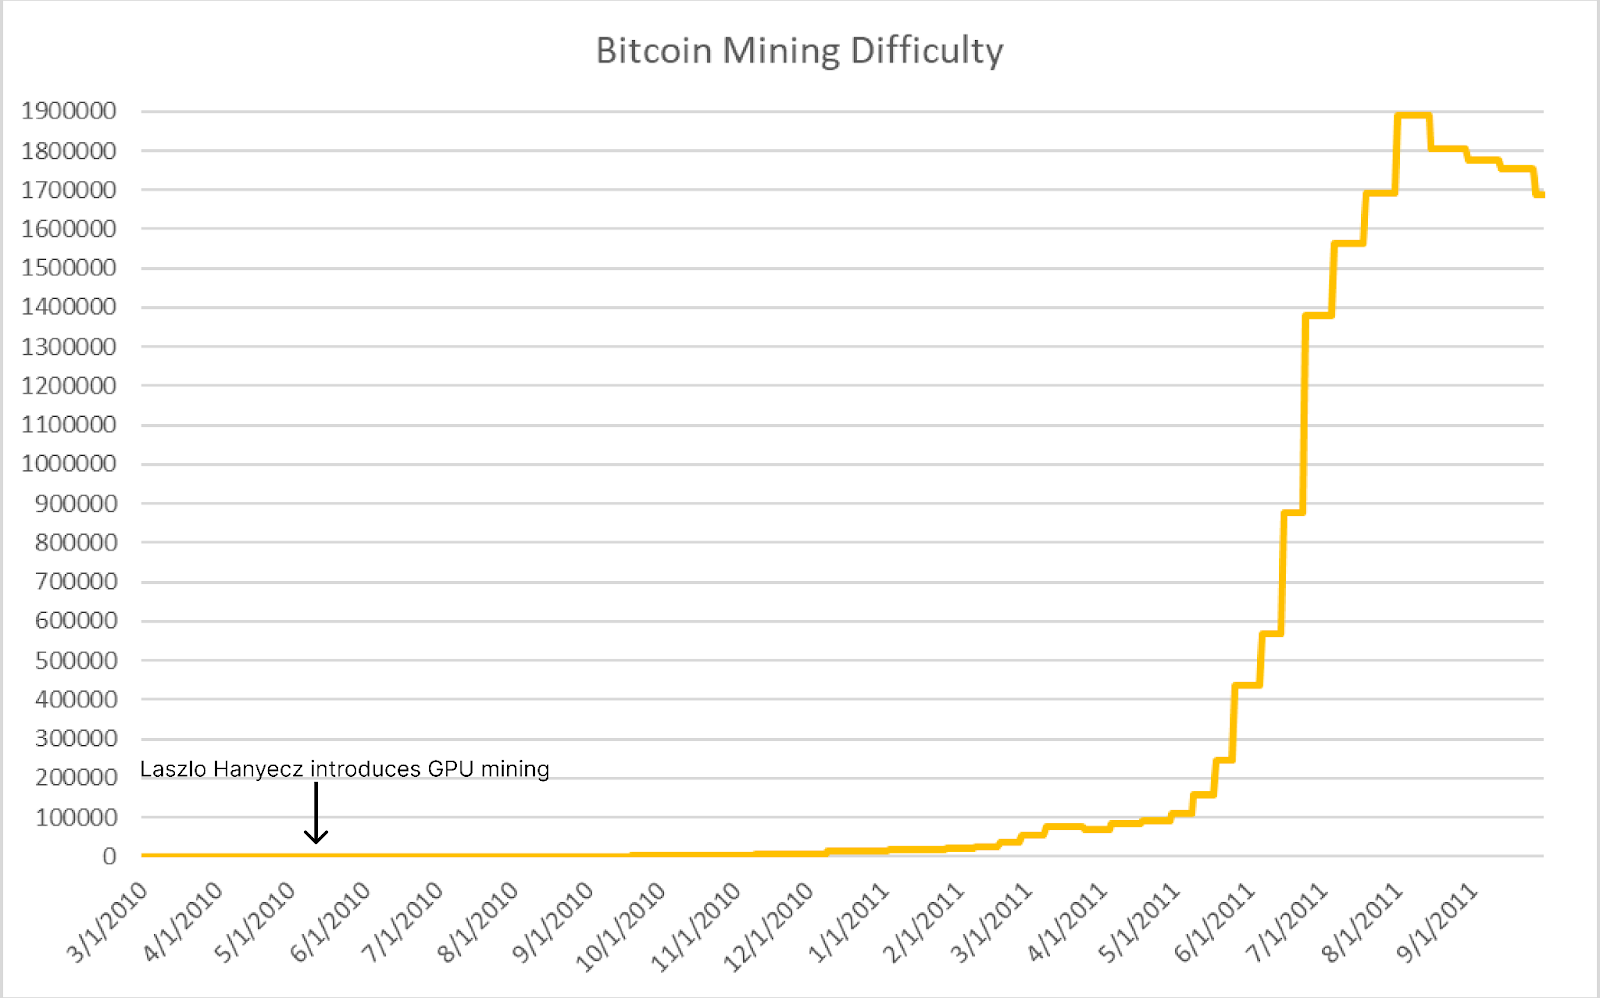 Bitcoin mining difficulty March 2010 to October 2011 